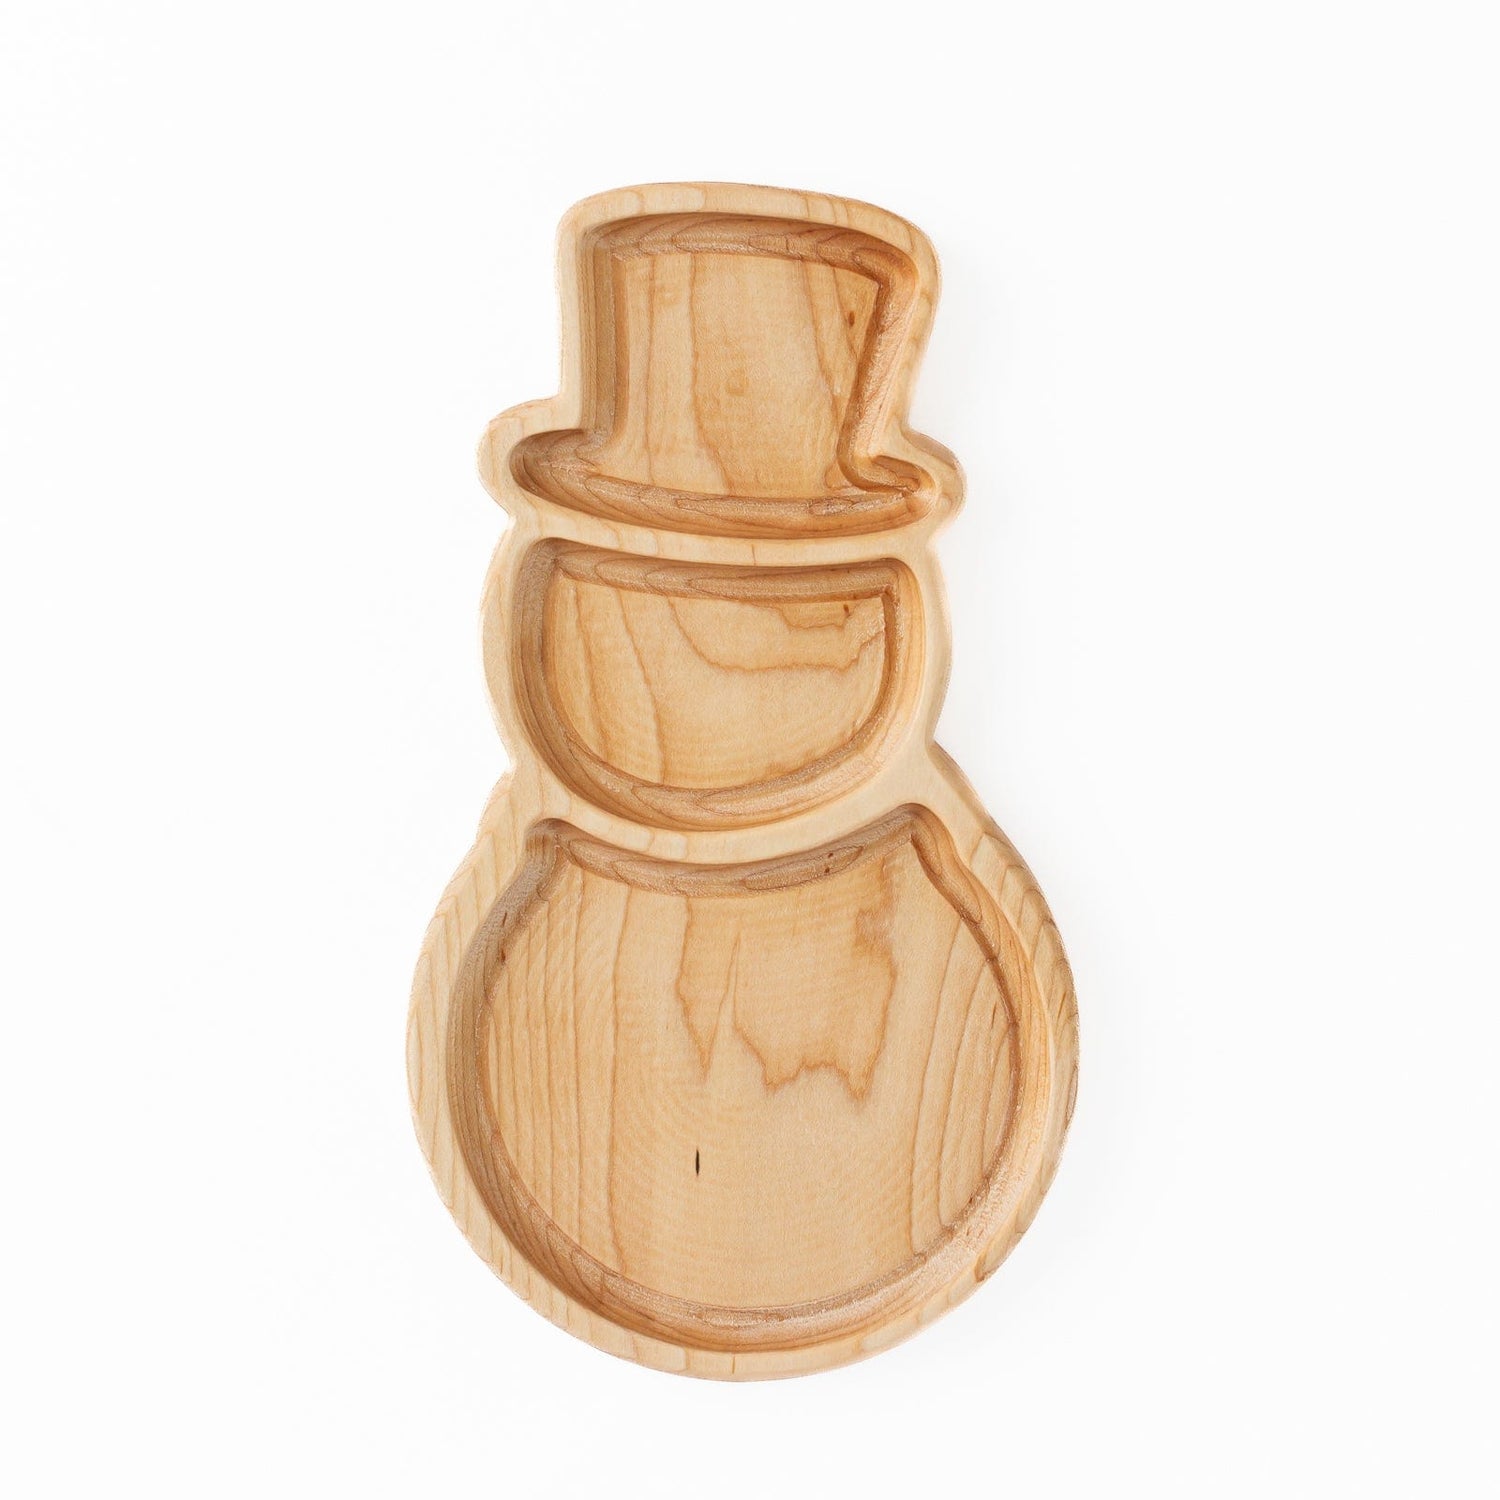 Aw & Co. Sensory Play Wooden Snow Person Plate / Sensory Tray (Made in Canada)